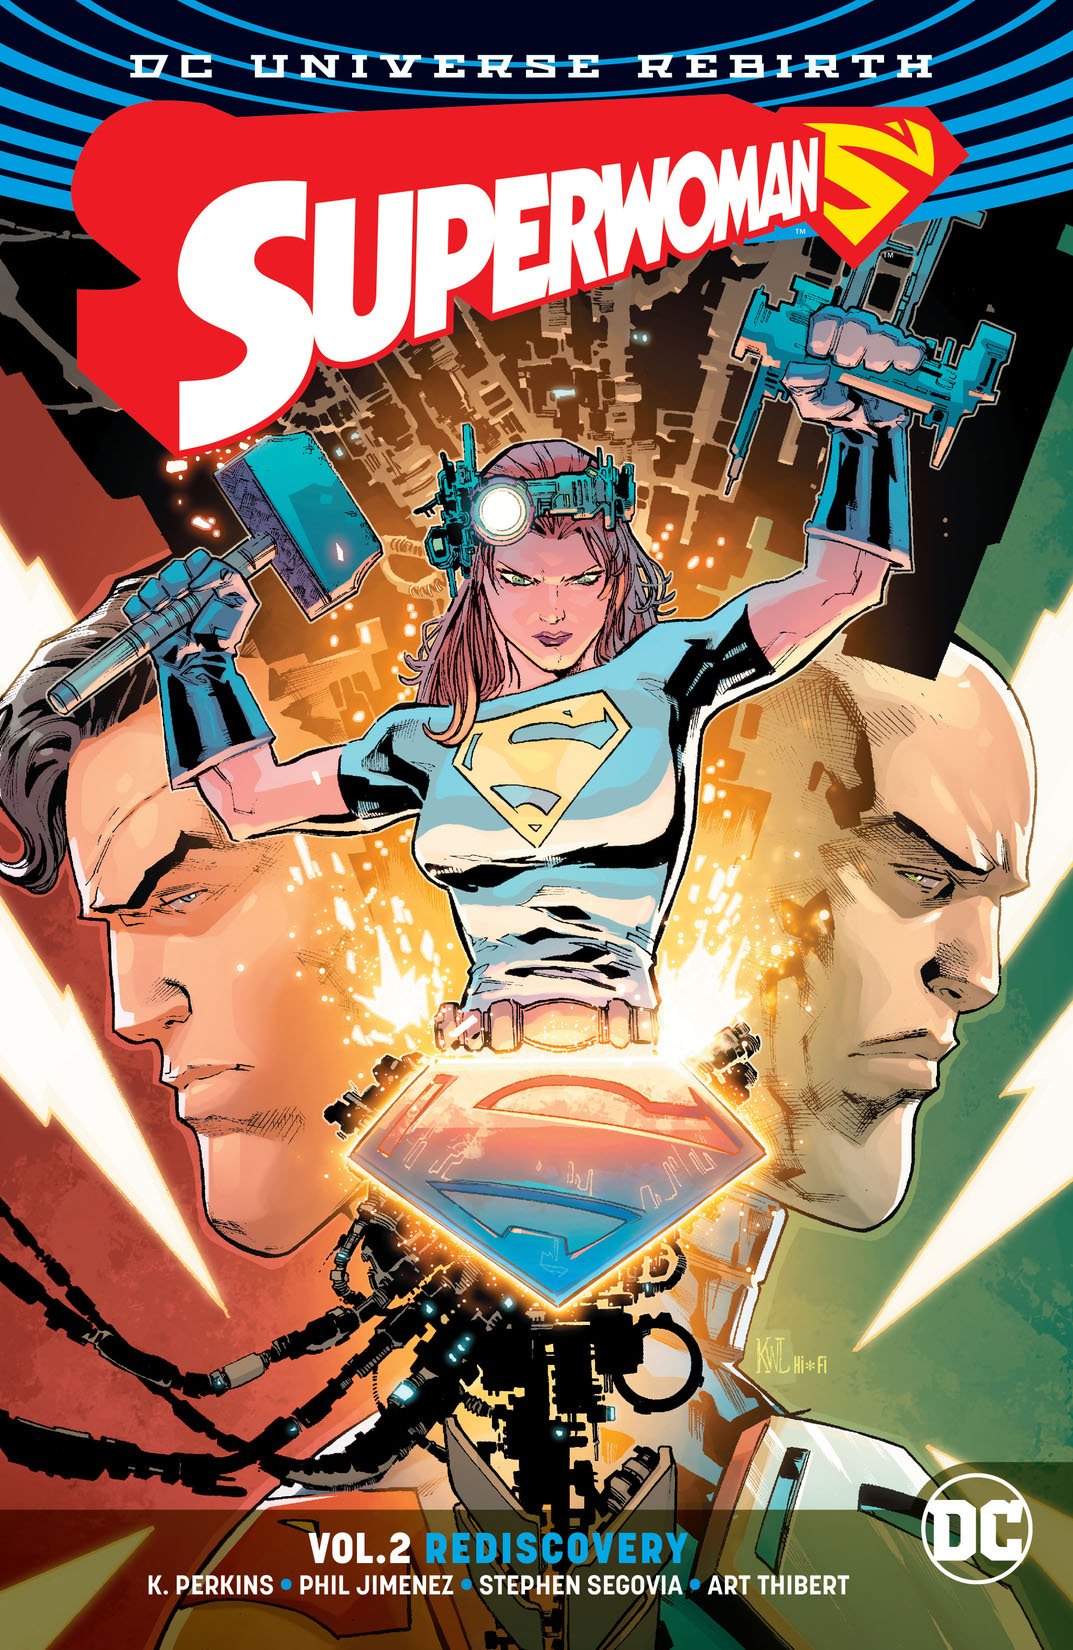 Superwoman Vol. 2: Rediscovery  preview images